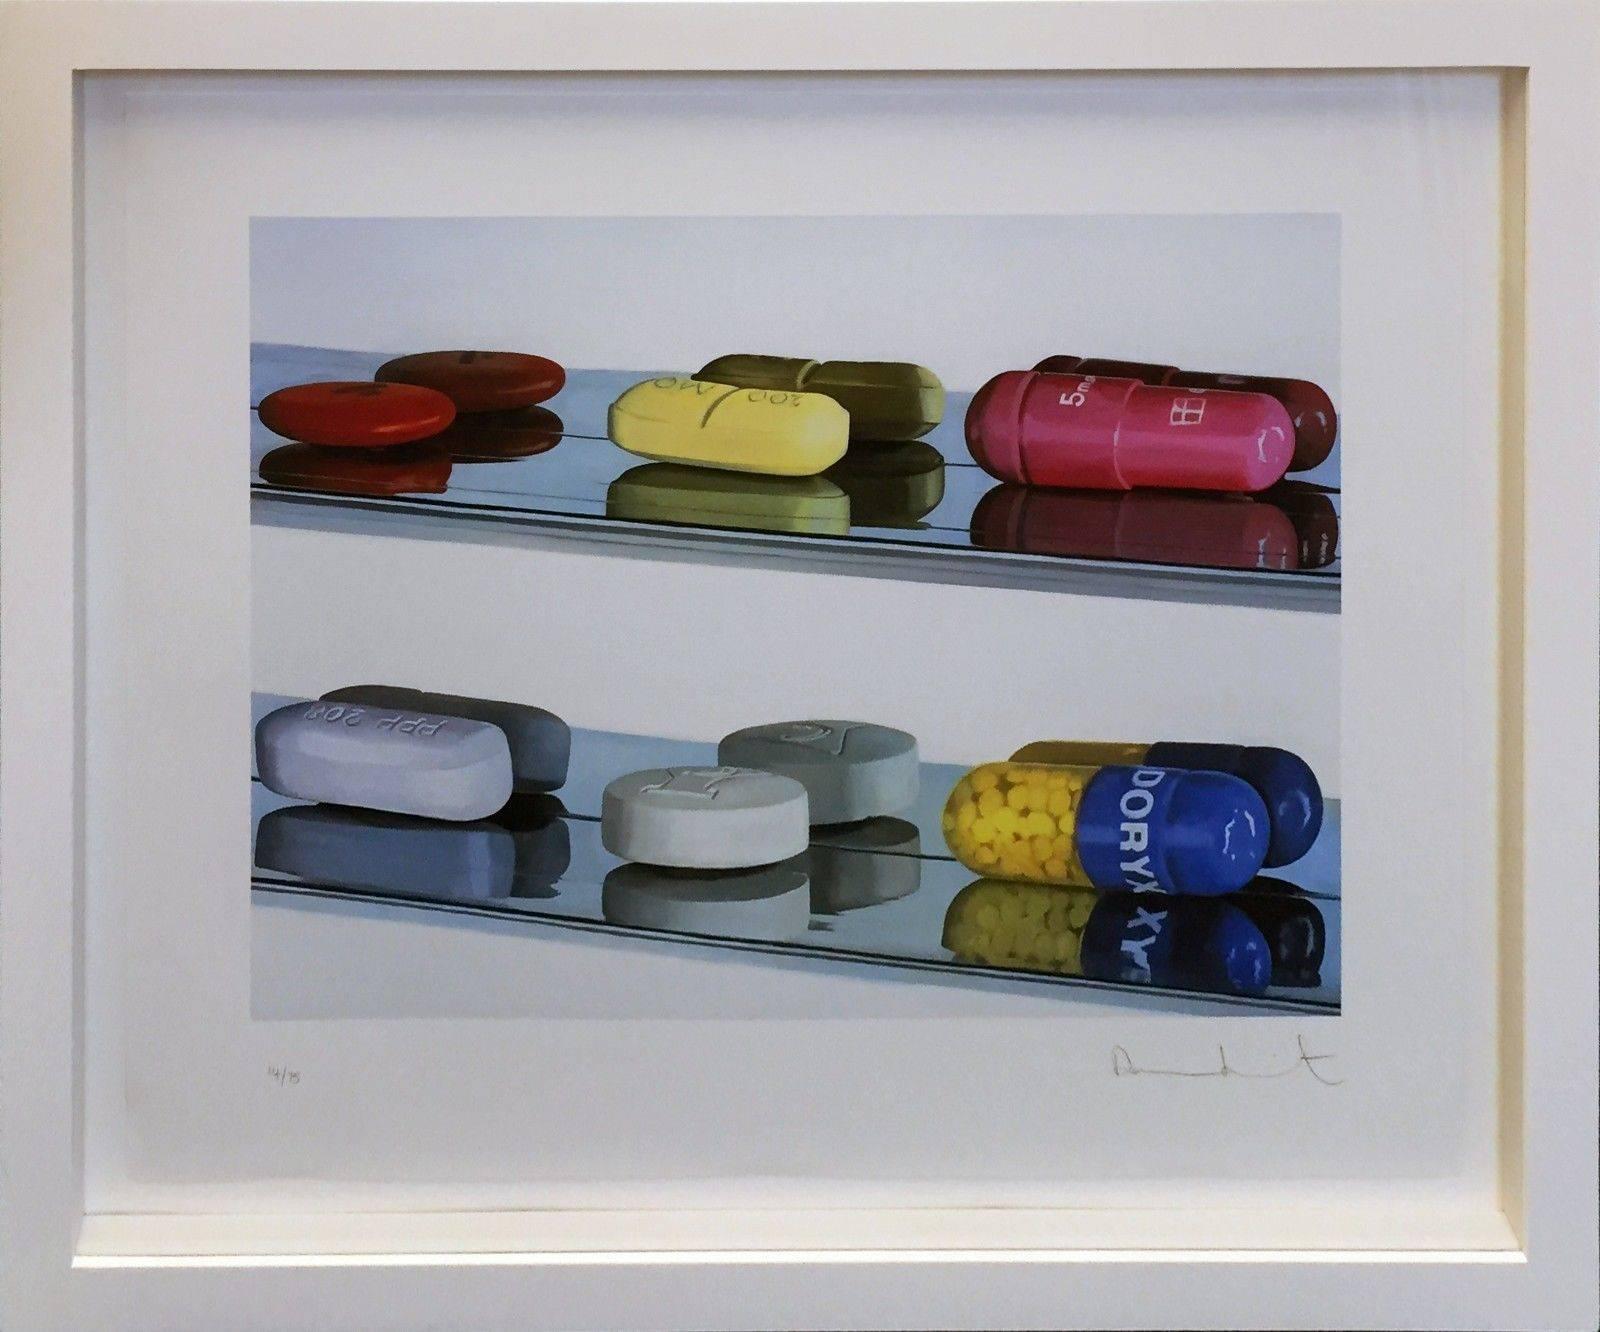 SIX PILLS (LARGE) - Print by Damien Hirst